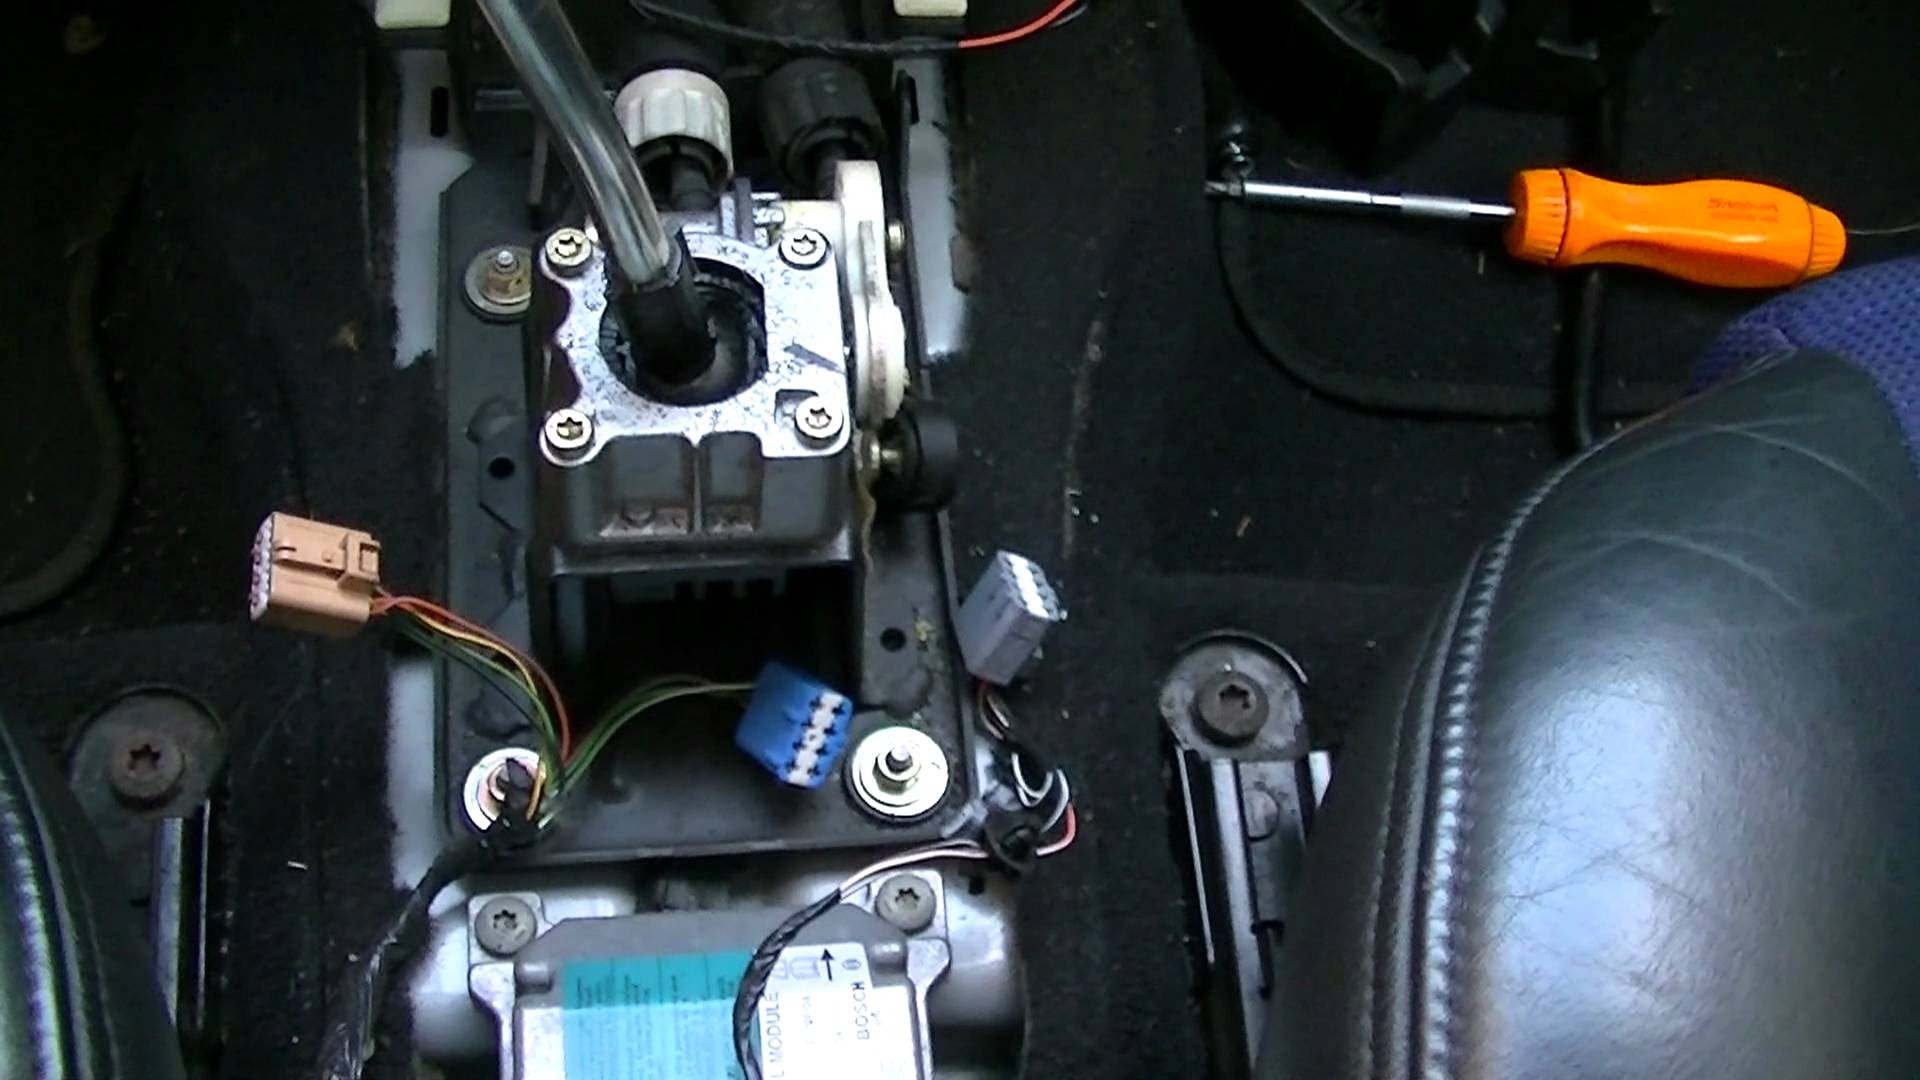 2004 ford Focus Engine Diagram Focus Shifter Cables Part 1 Of 2004 ford Focus Engine Diagram